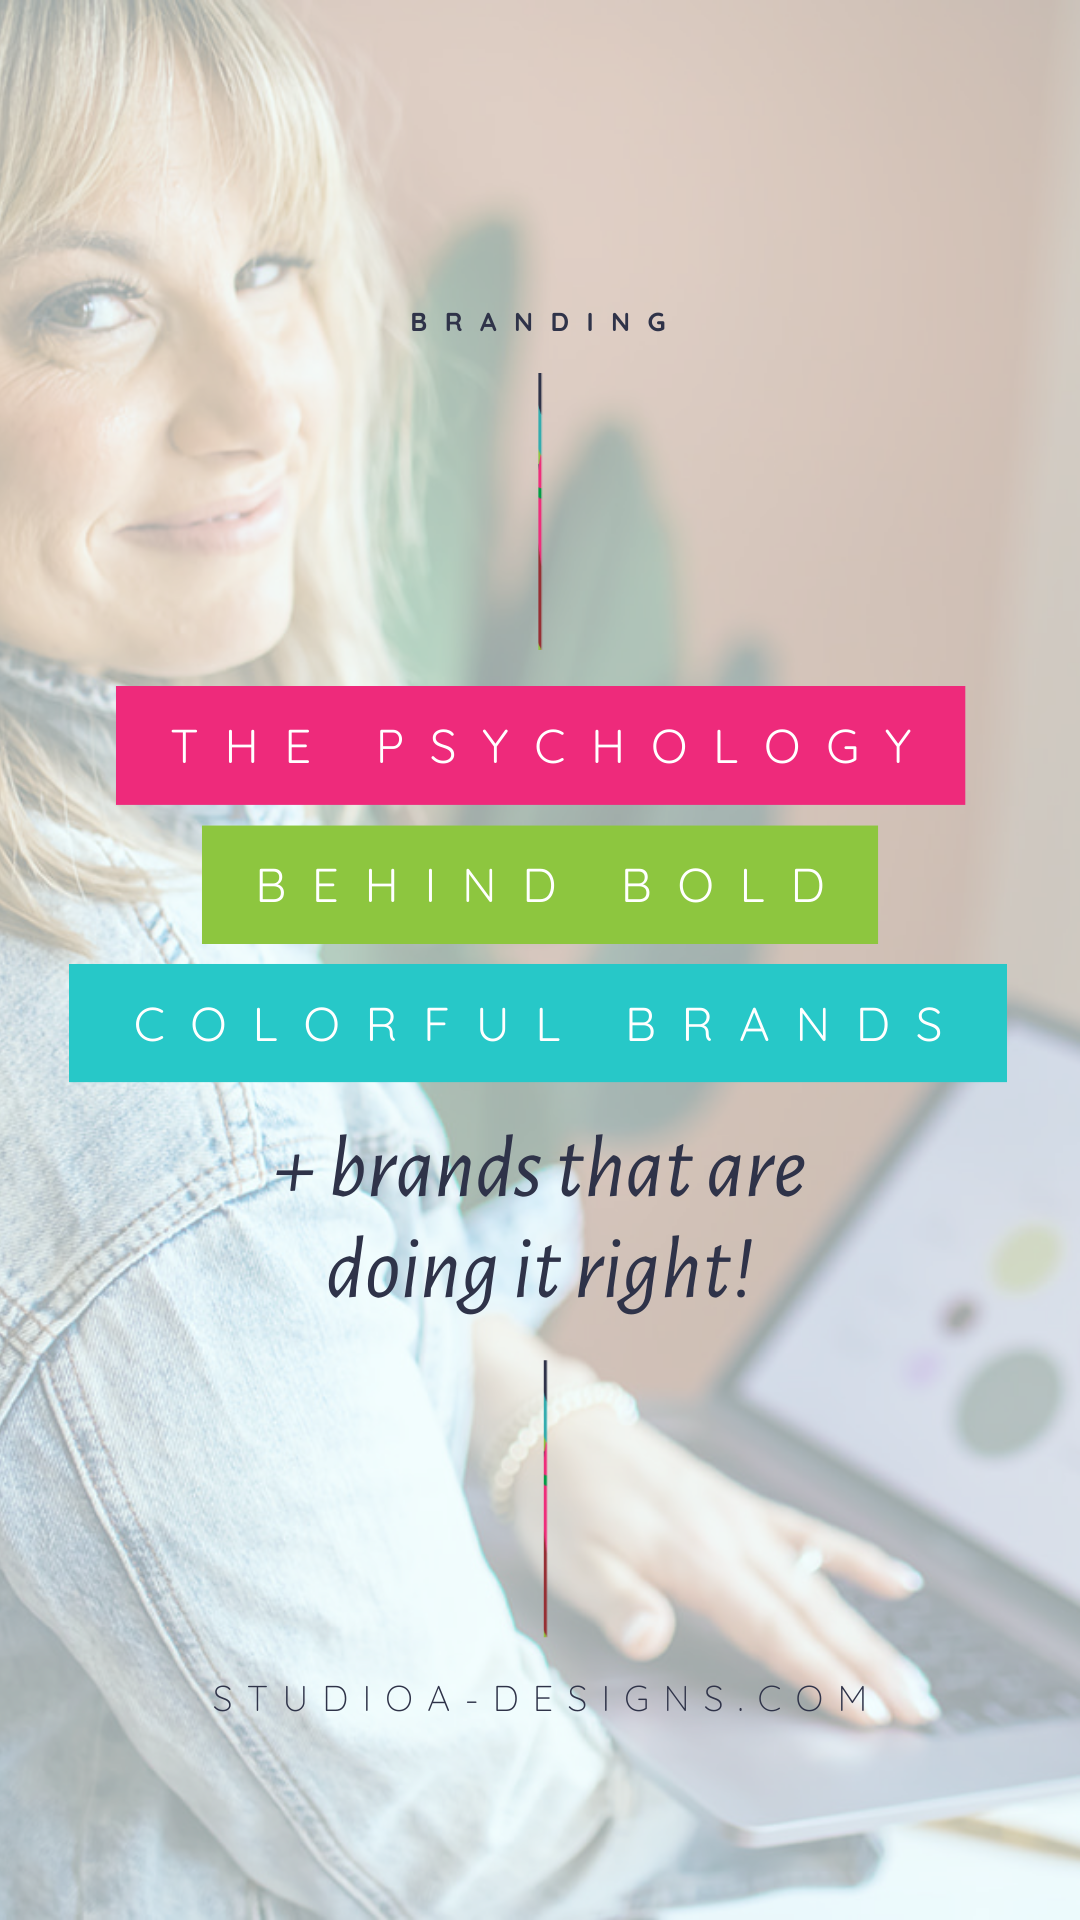 The Psychology Behind Bold Colorful Brand + brand that are doing it right!